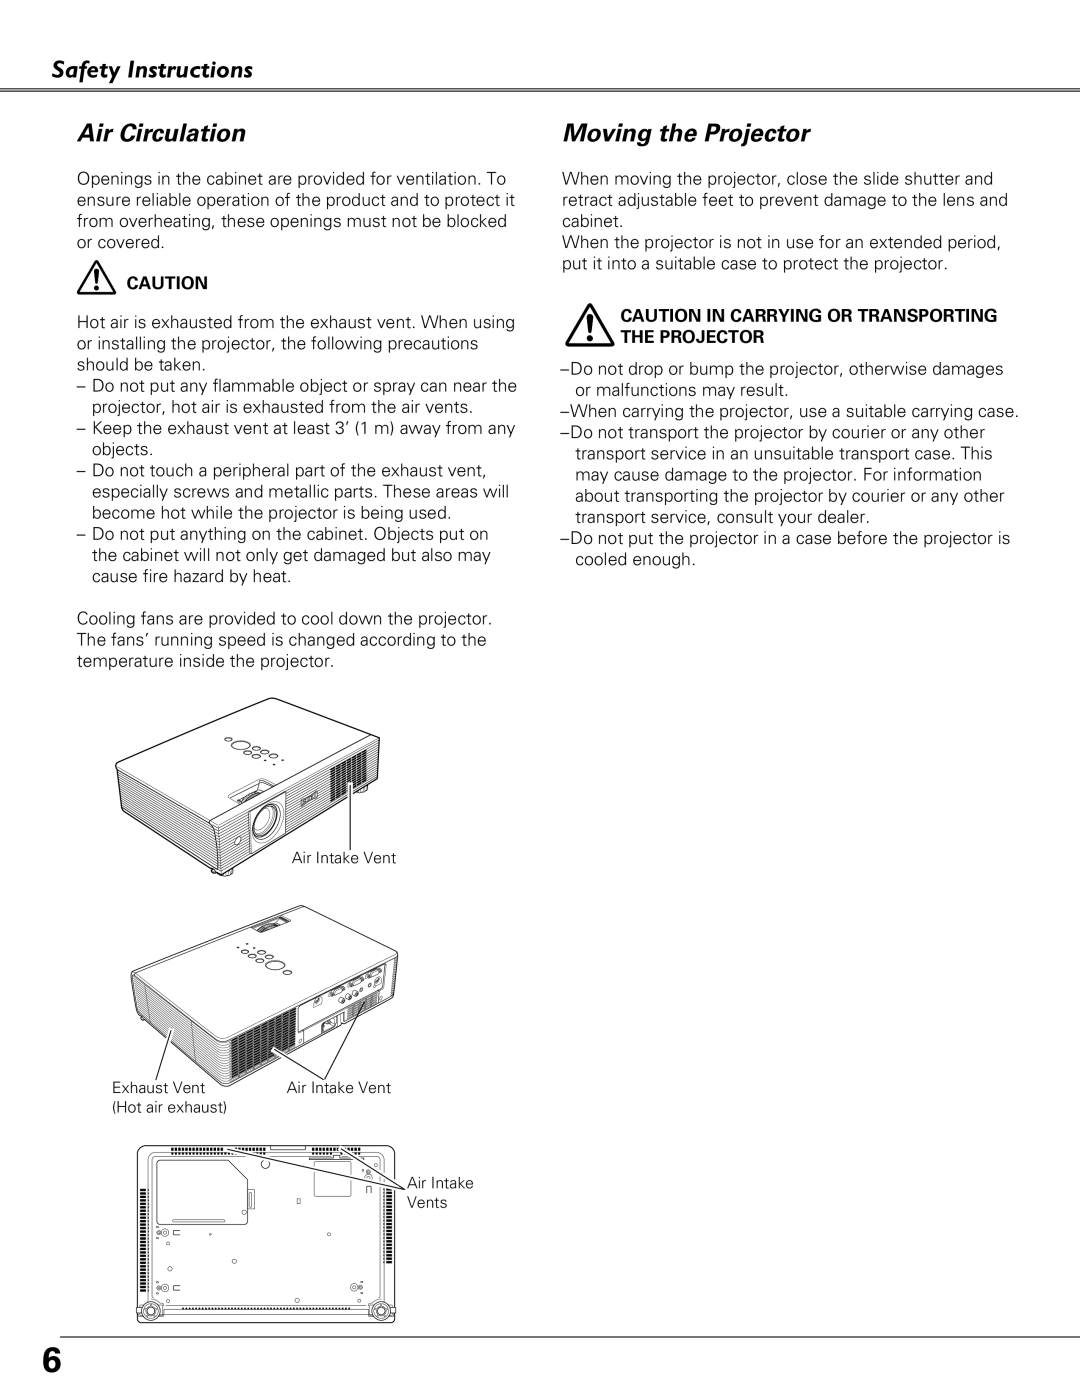 Eiki LC-XB41 Safety Instructions Air Circulation, Moving the Projector, Caution In Carrying Or Transporting The Projector 